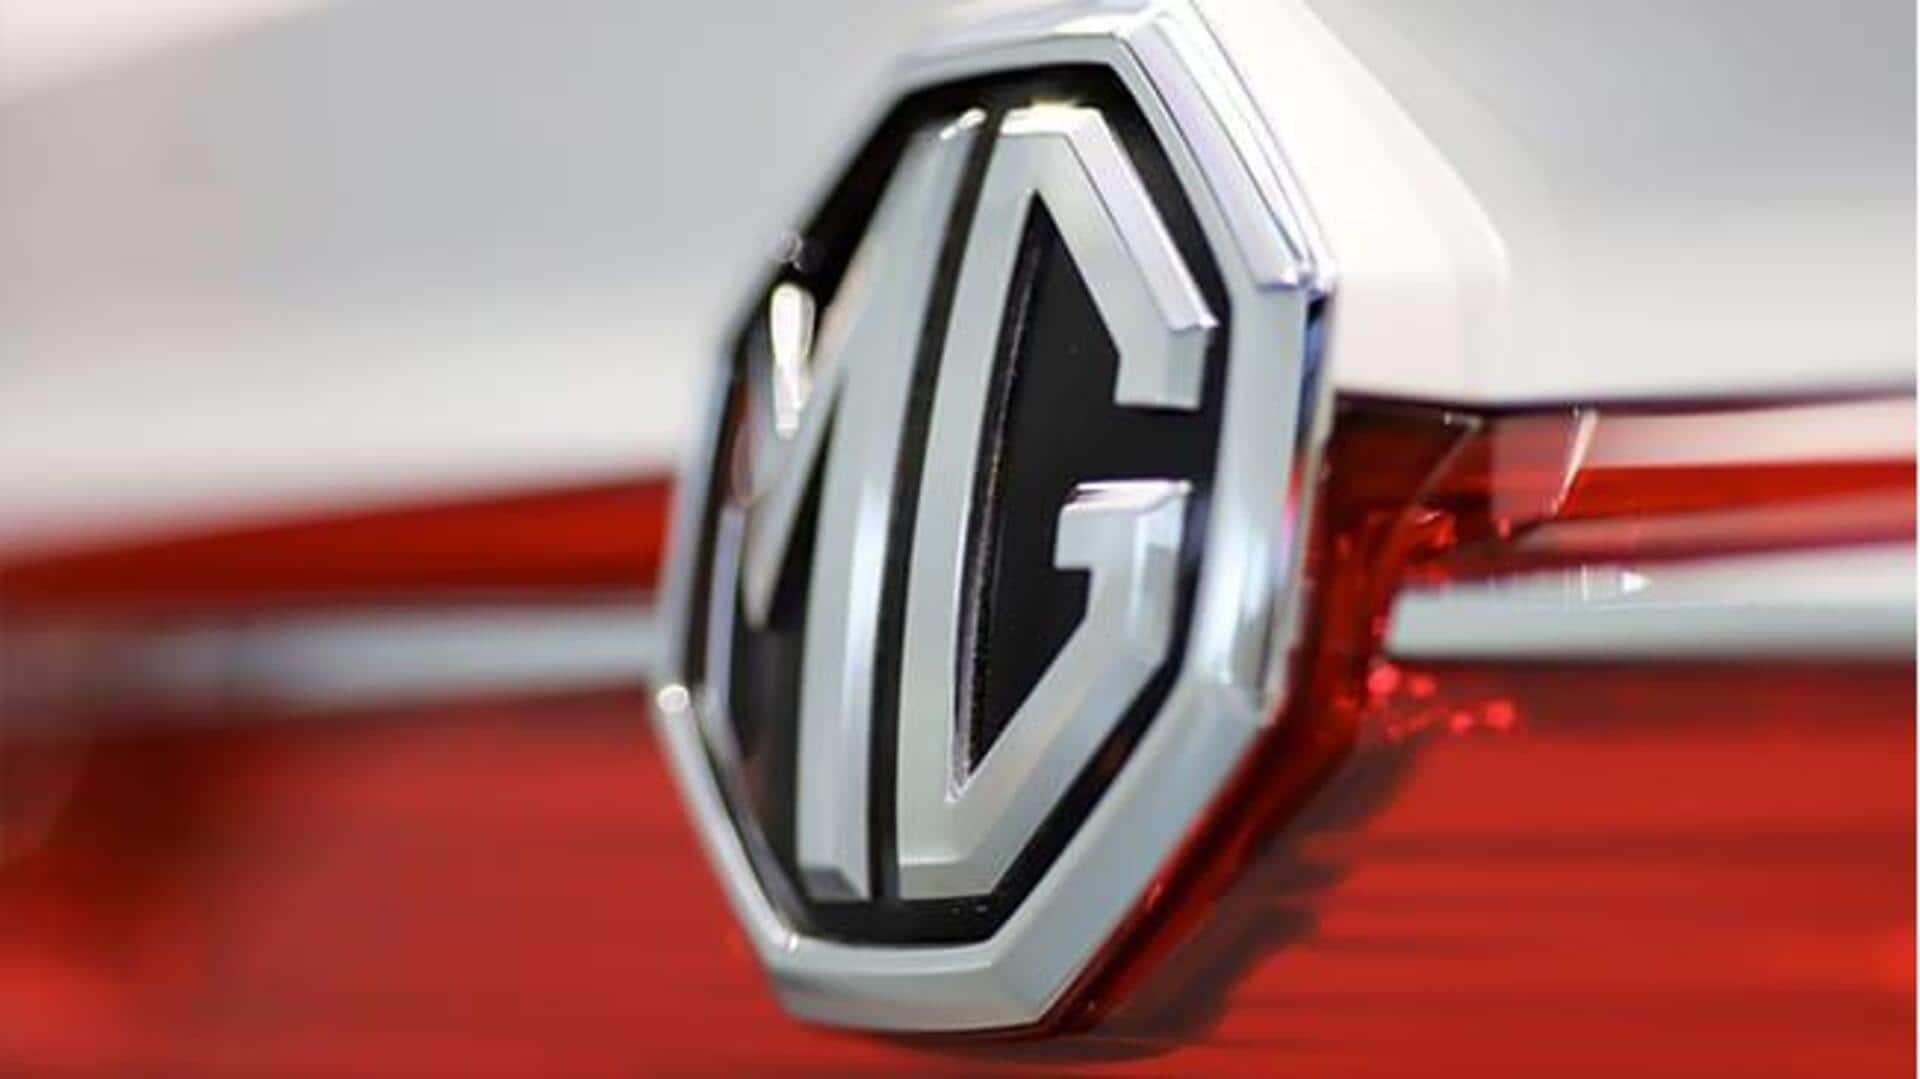 MG Motor plans to launch two new EVs in India